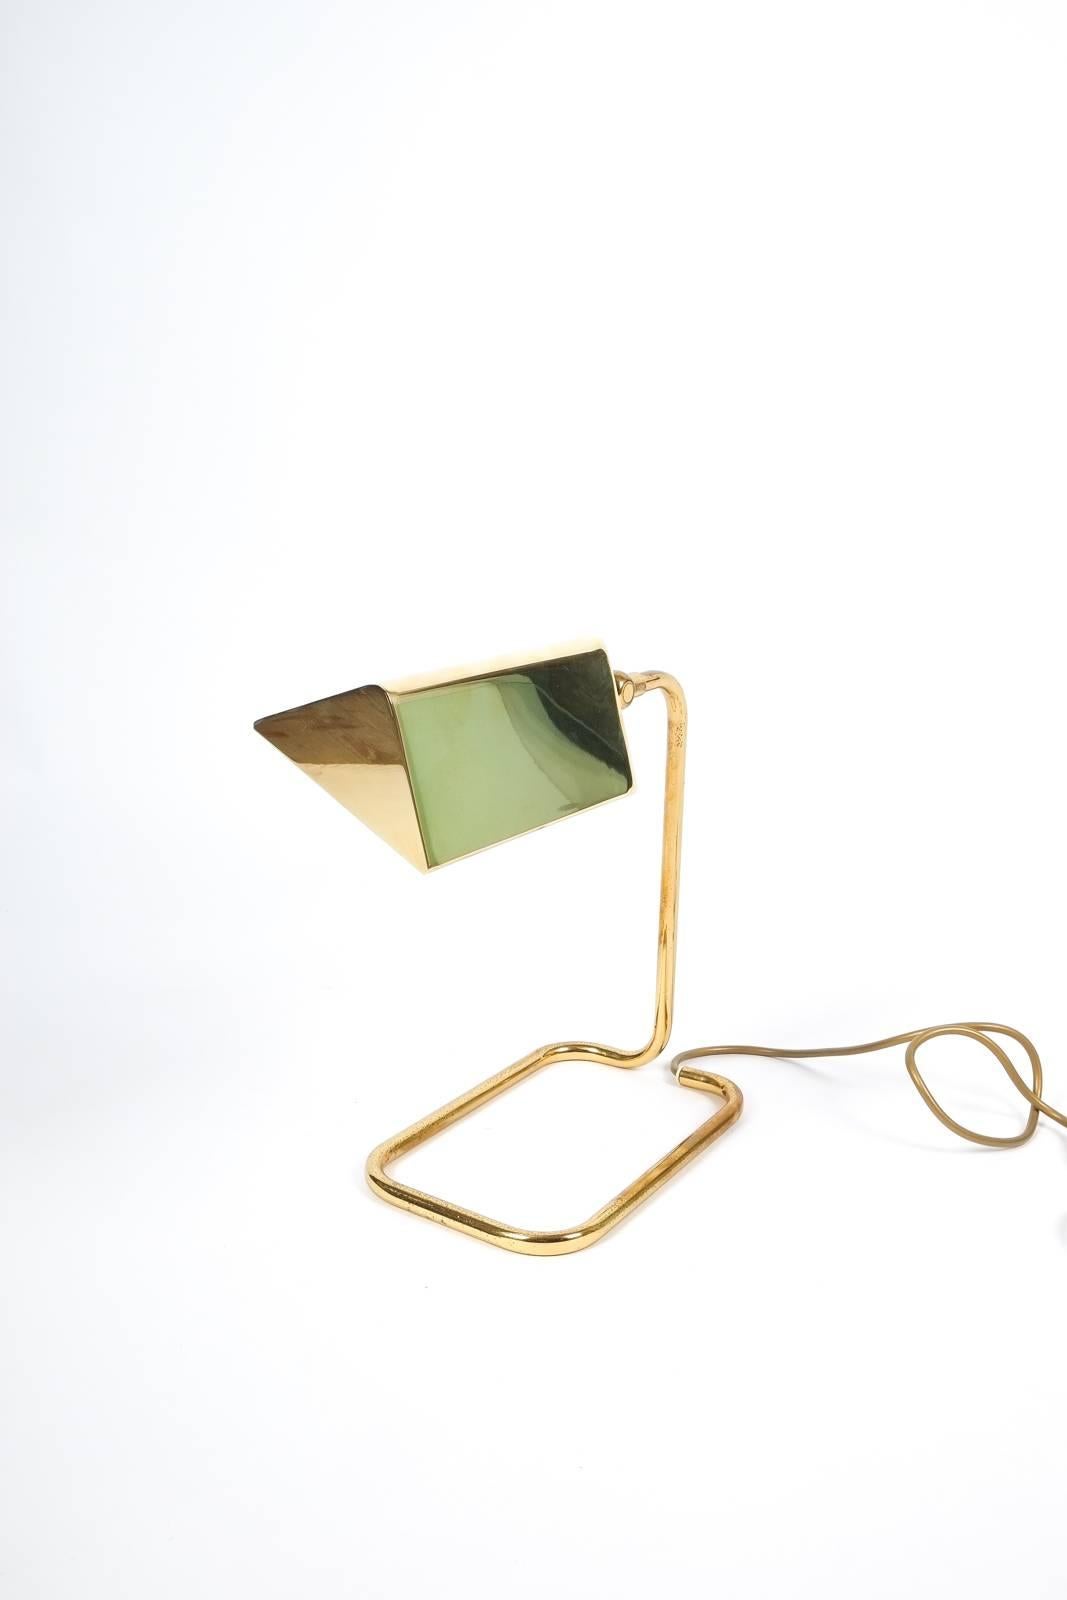 Gorgeous Brass Table Lamp by Koch Lowy, Germany 1